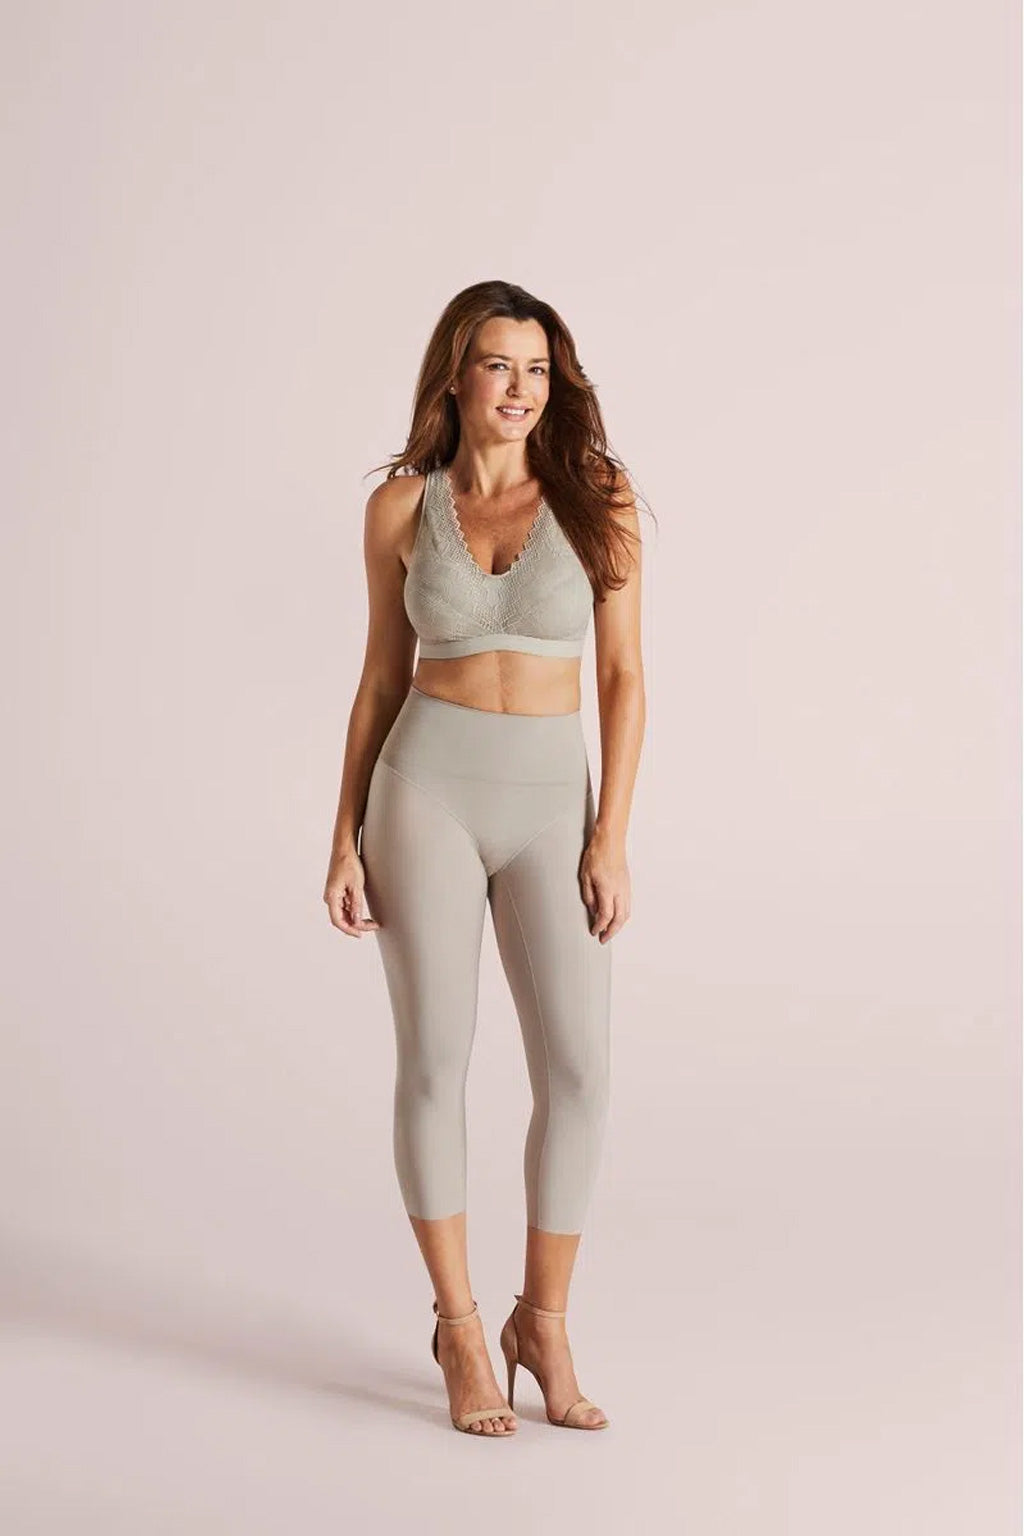 CAPRI Invisible Control AESTHETICS Trousers Modeling Shapewear with Strong compression on the abdomen